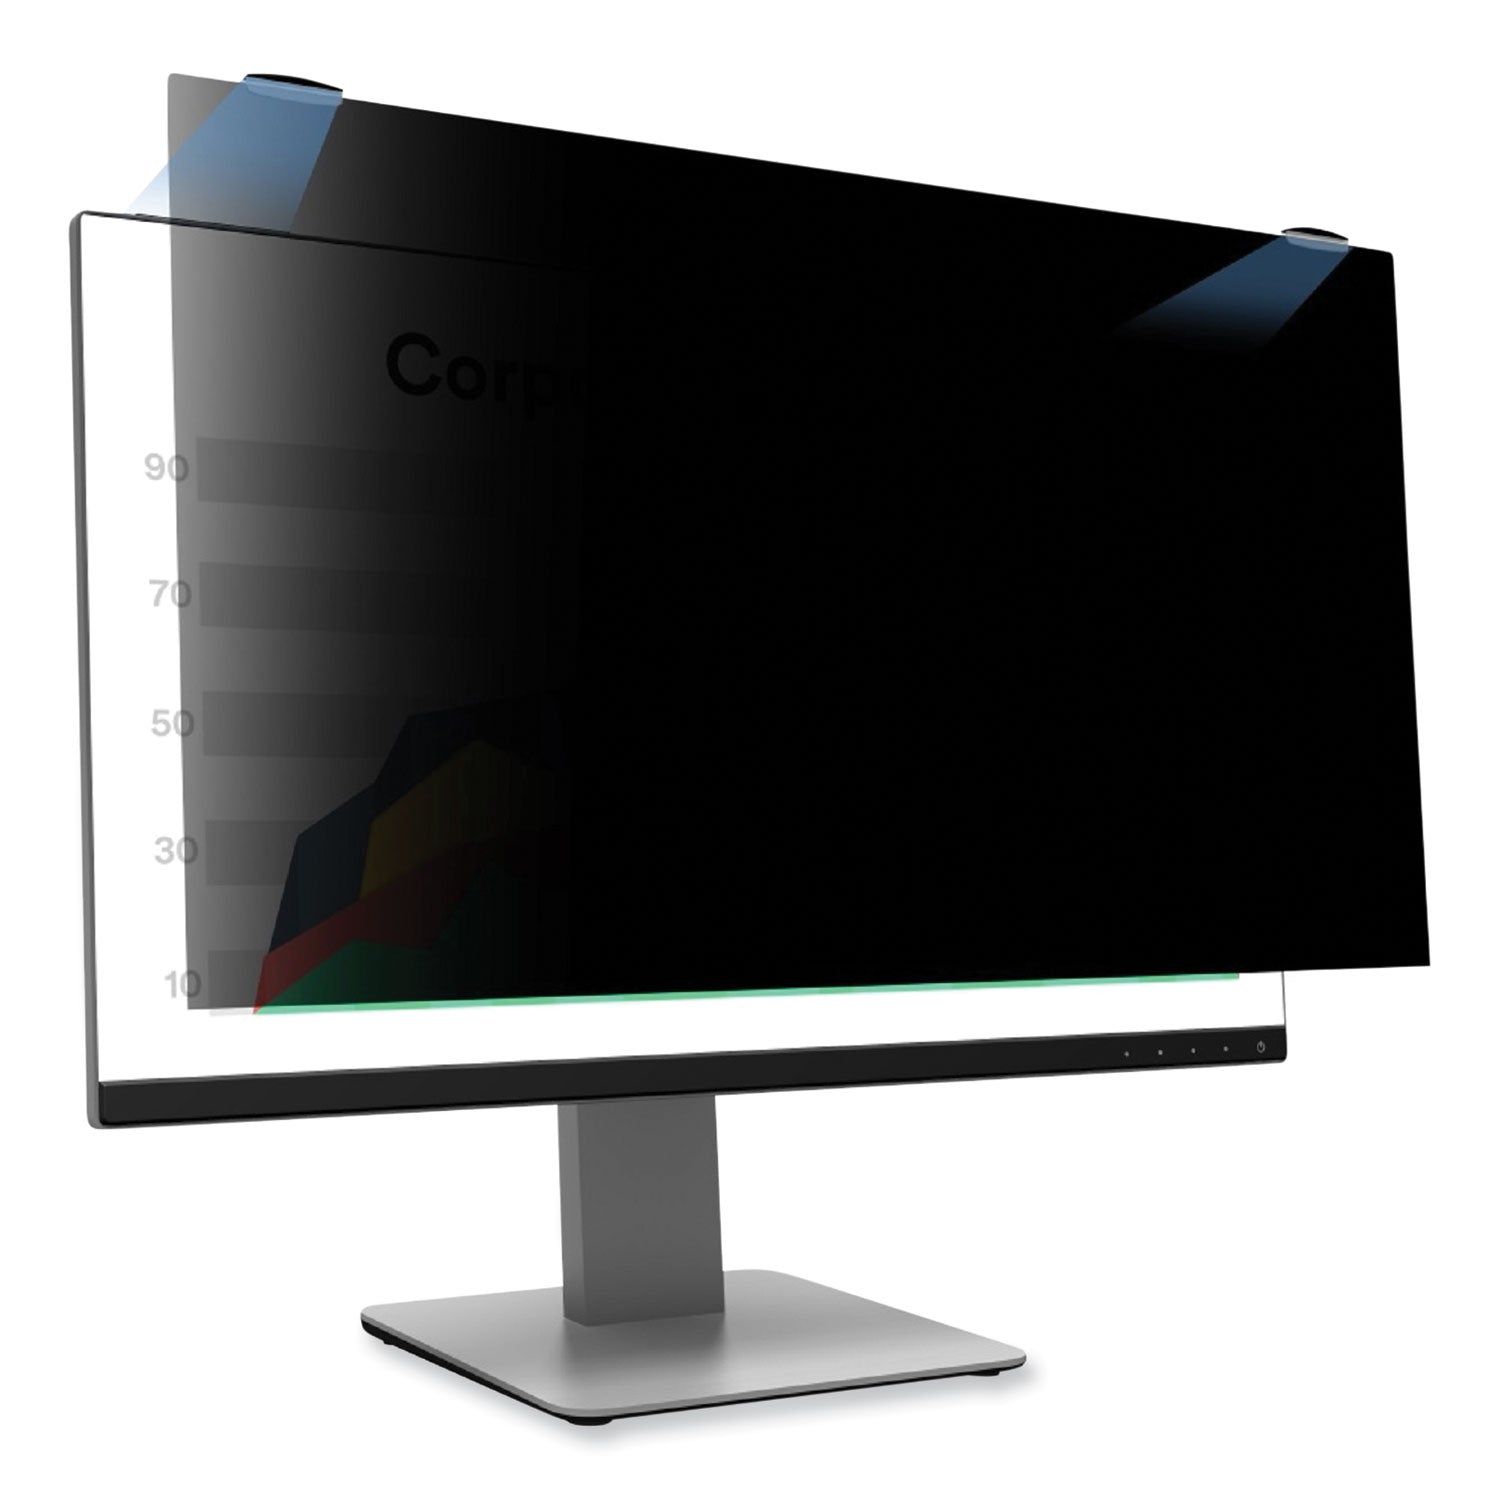 comply-magnetic-attach-privacy-filter-for-27-widescreen-flat-panel-monitor-169-aspect-ratio_mmmpf270w9em - 1